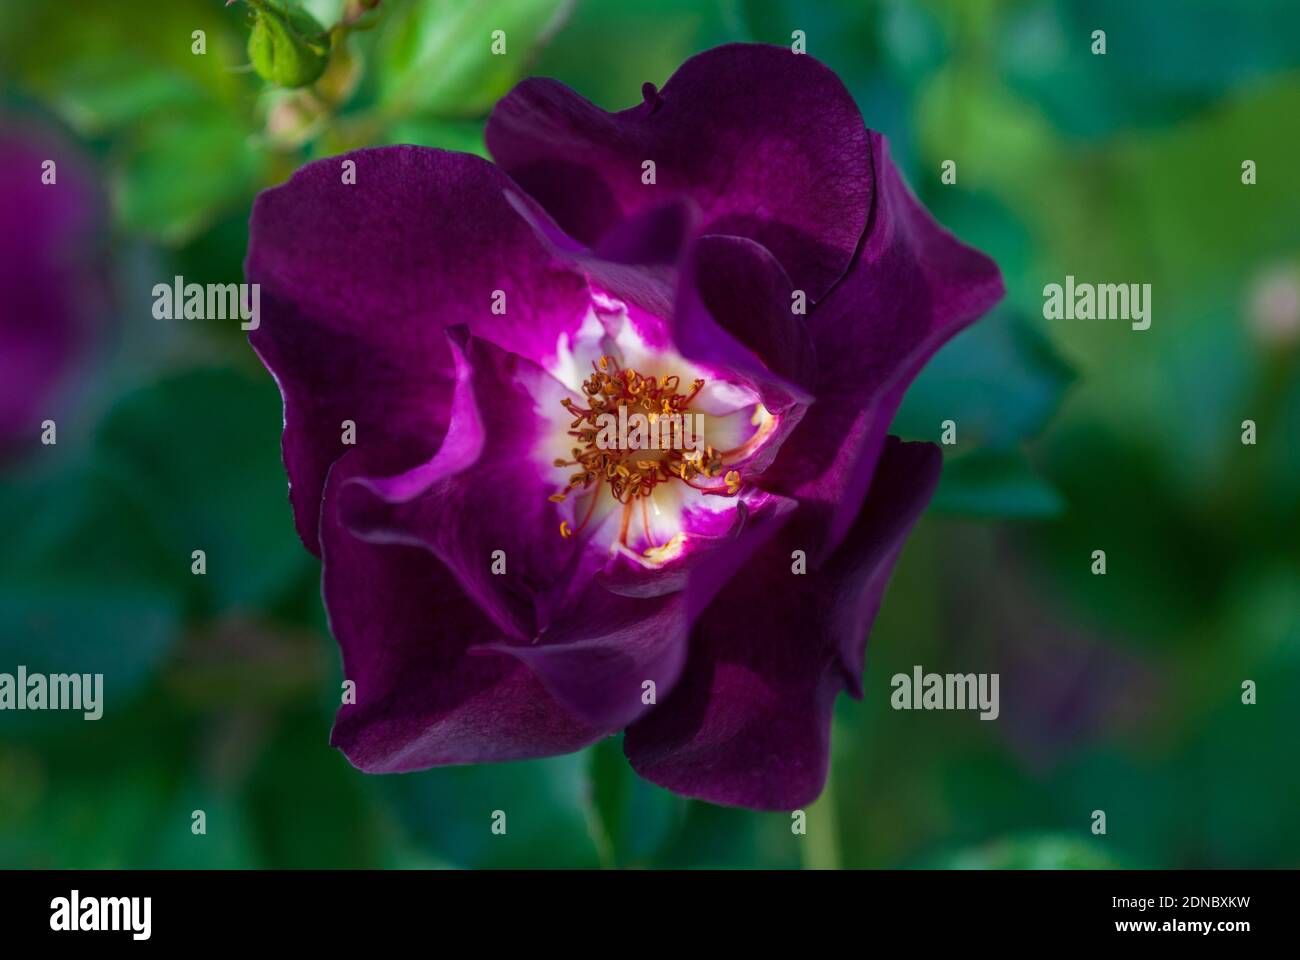 Semi Double Roses High Resolution Stock Photography and Images - Alamy